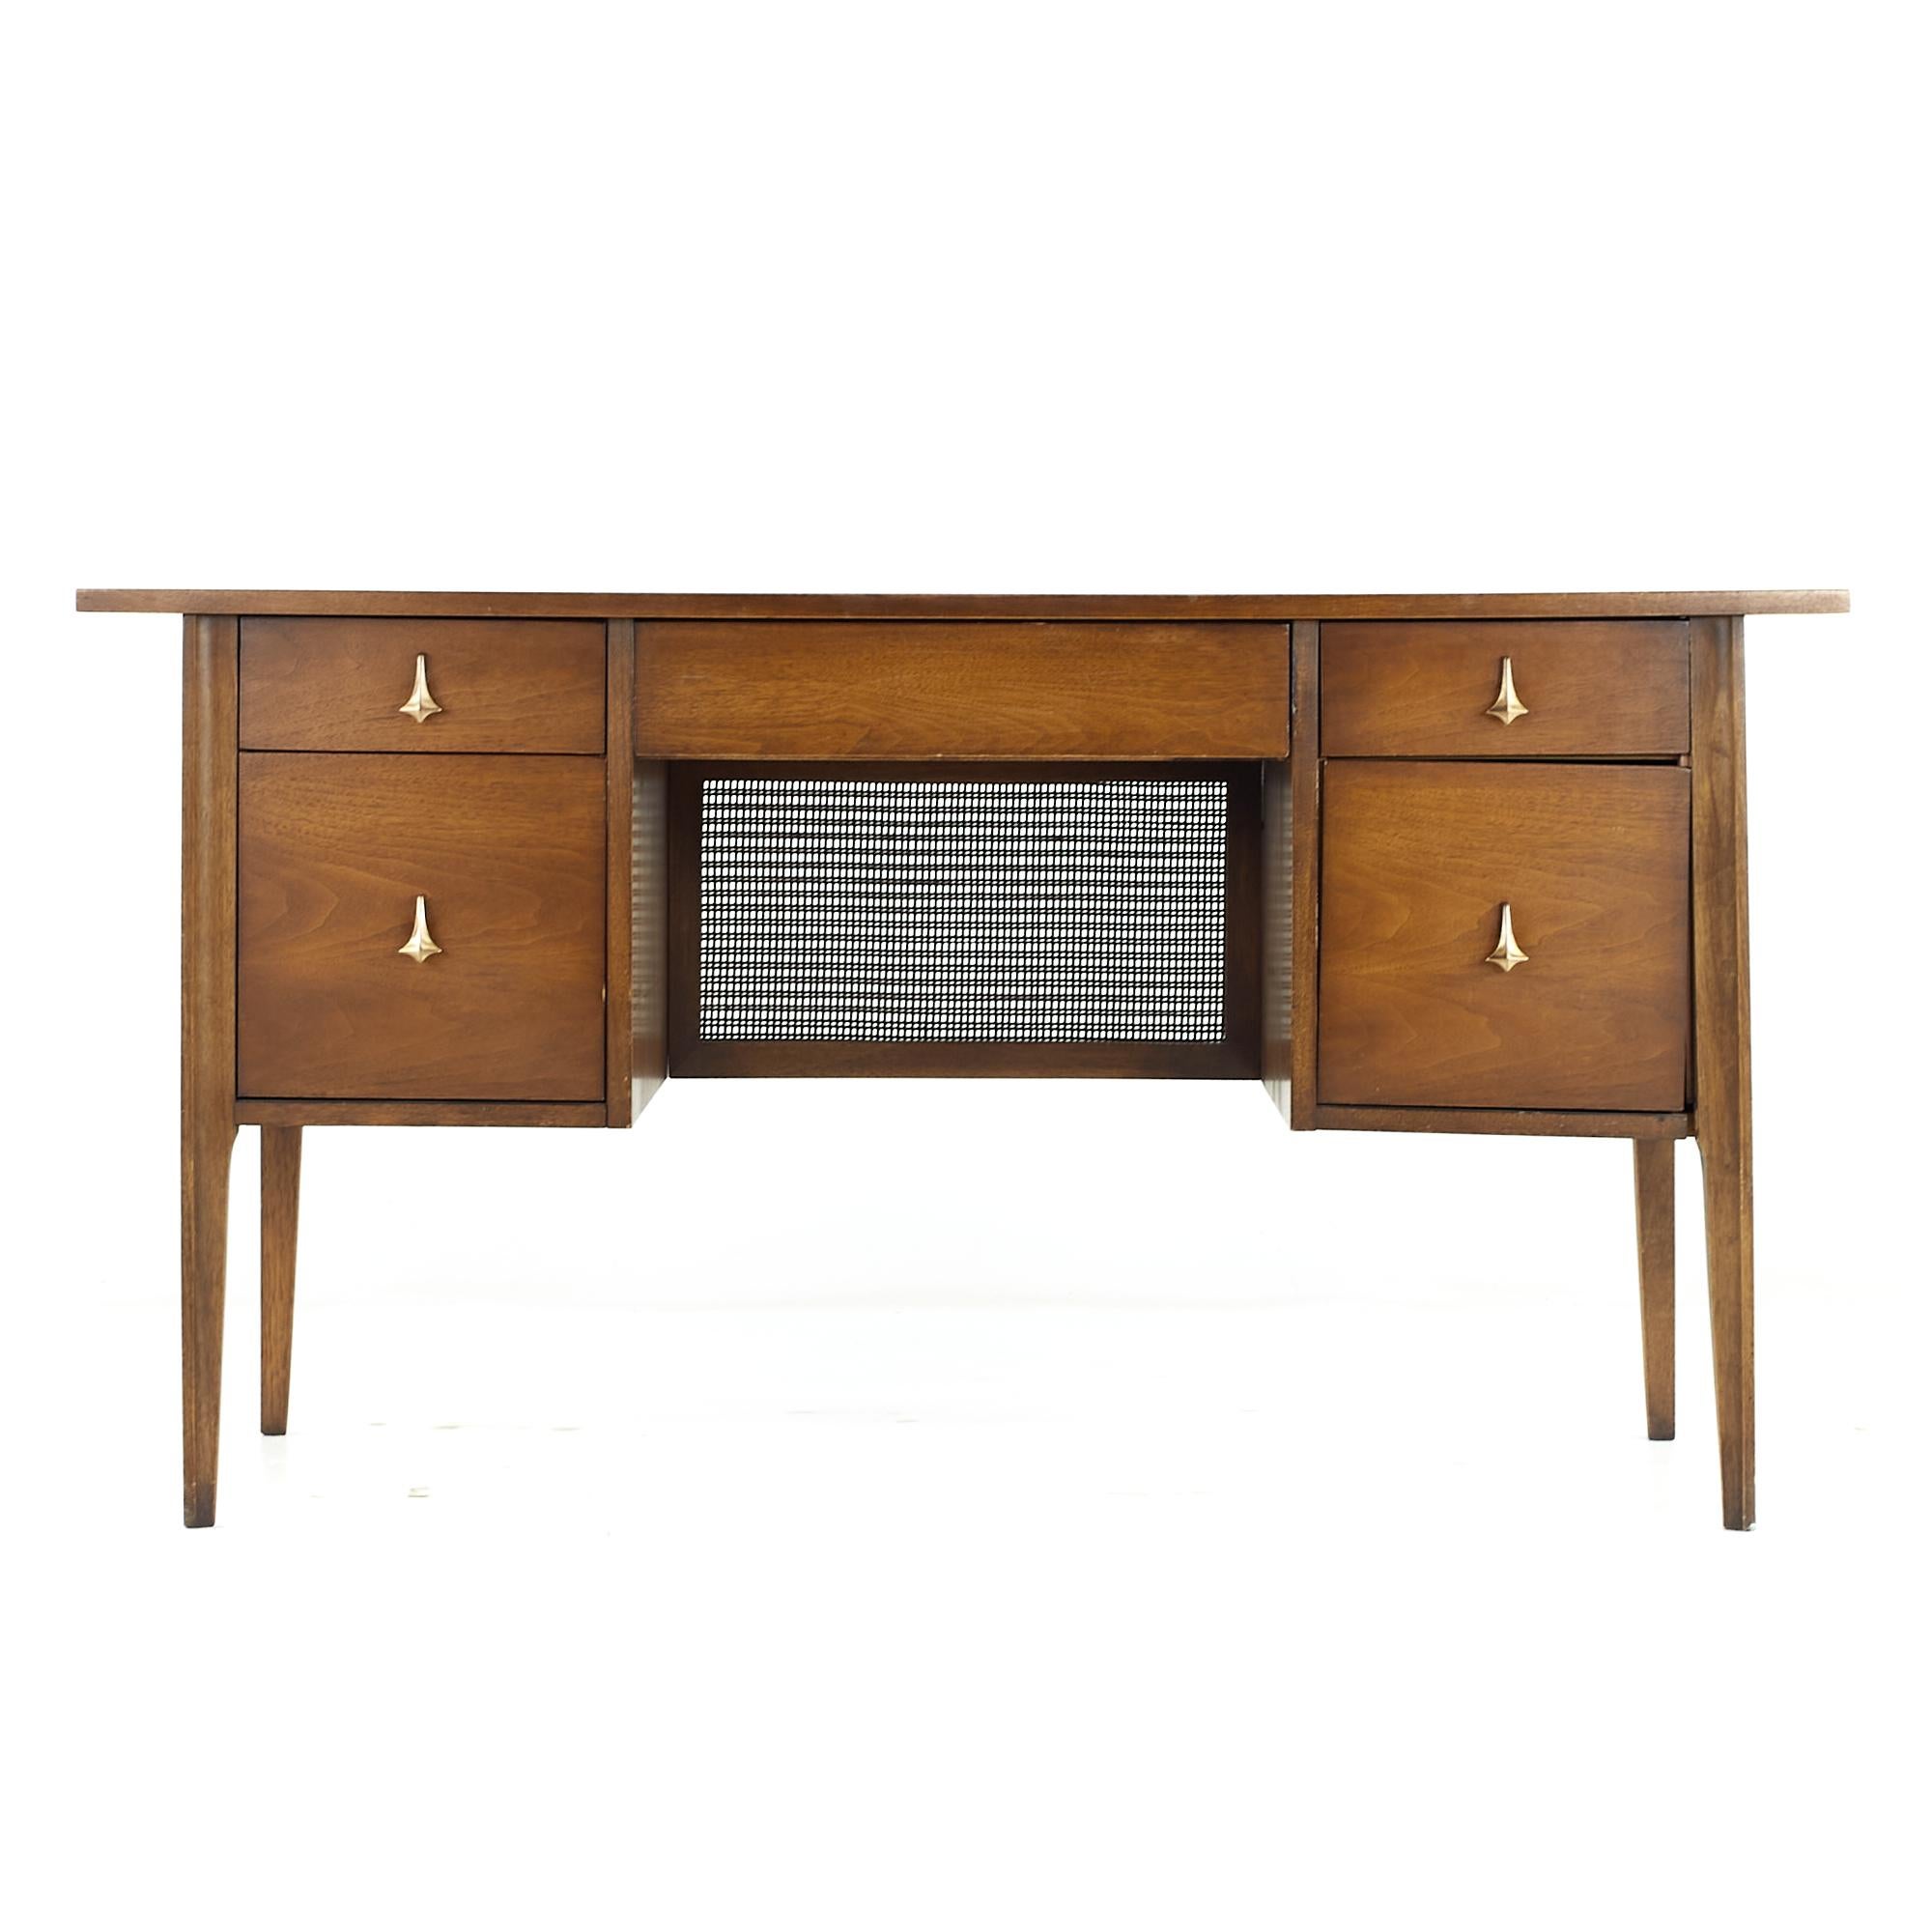 Broyhill Brasilia midcentury Desk Walnut and Brass Desk

This desk measures: 56 wide x 23 deep x 30 high, with a chair clearance of 24.5 inches

All pieces of furniture can be had in what we call restored vintage condition. That means the piece